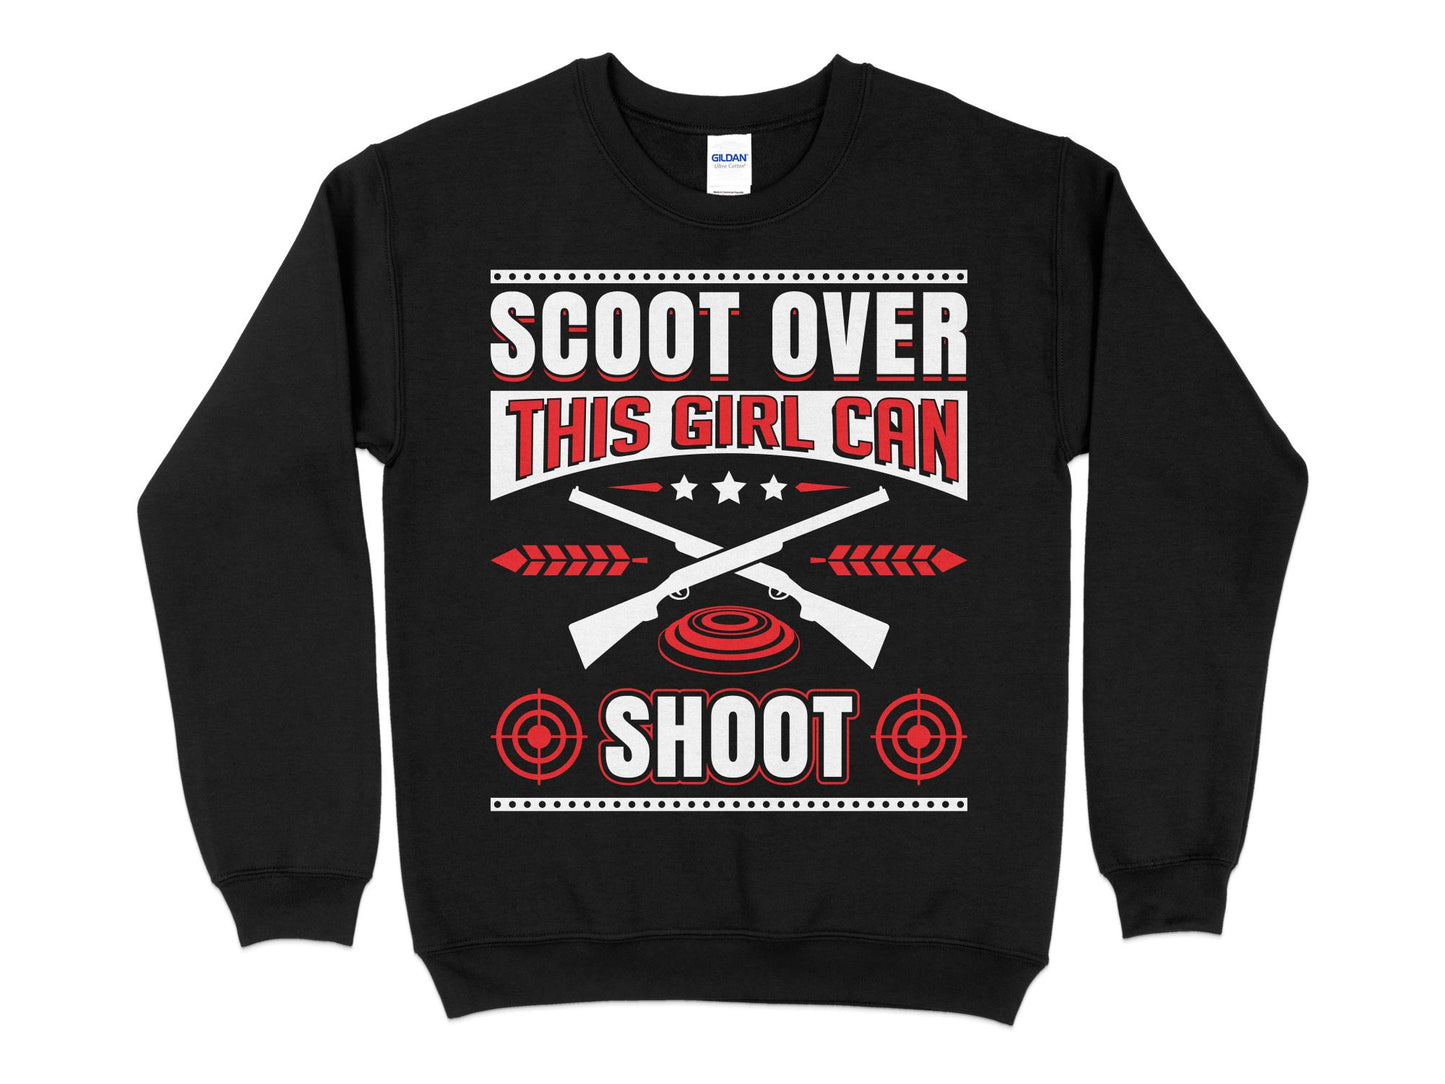 Trap Shooting Sweatshirt - Scoot Over This Girl Can Shoot, black